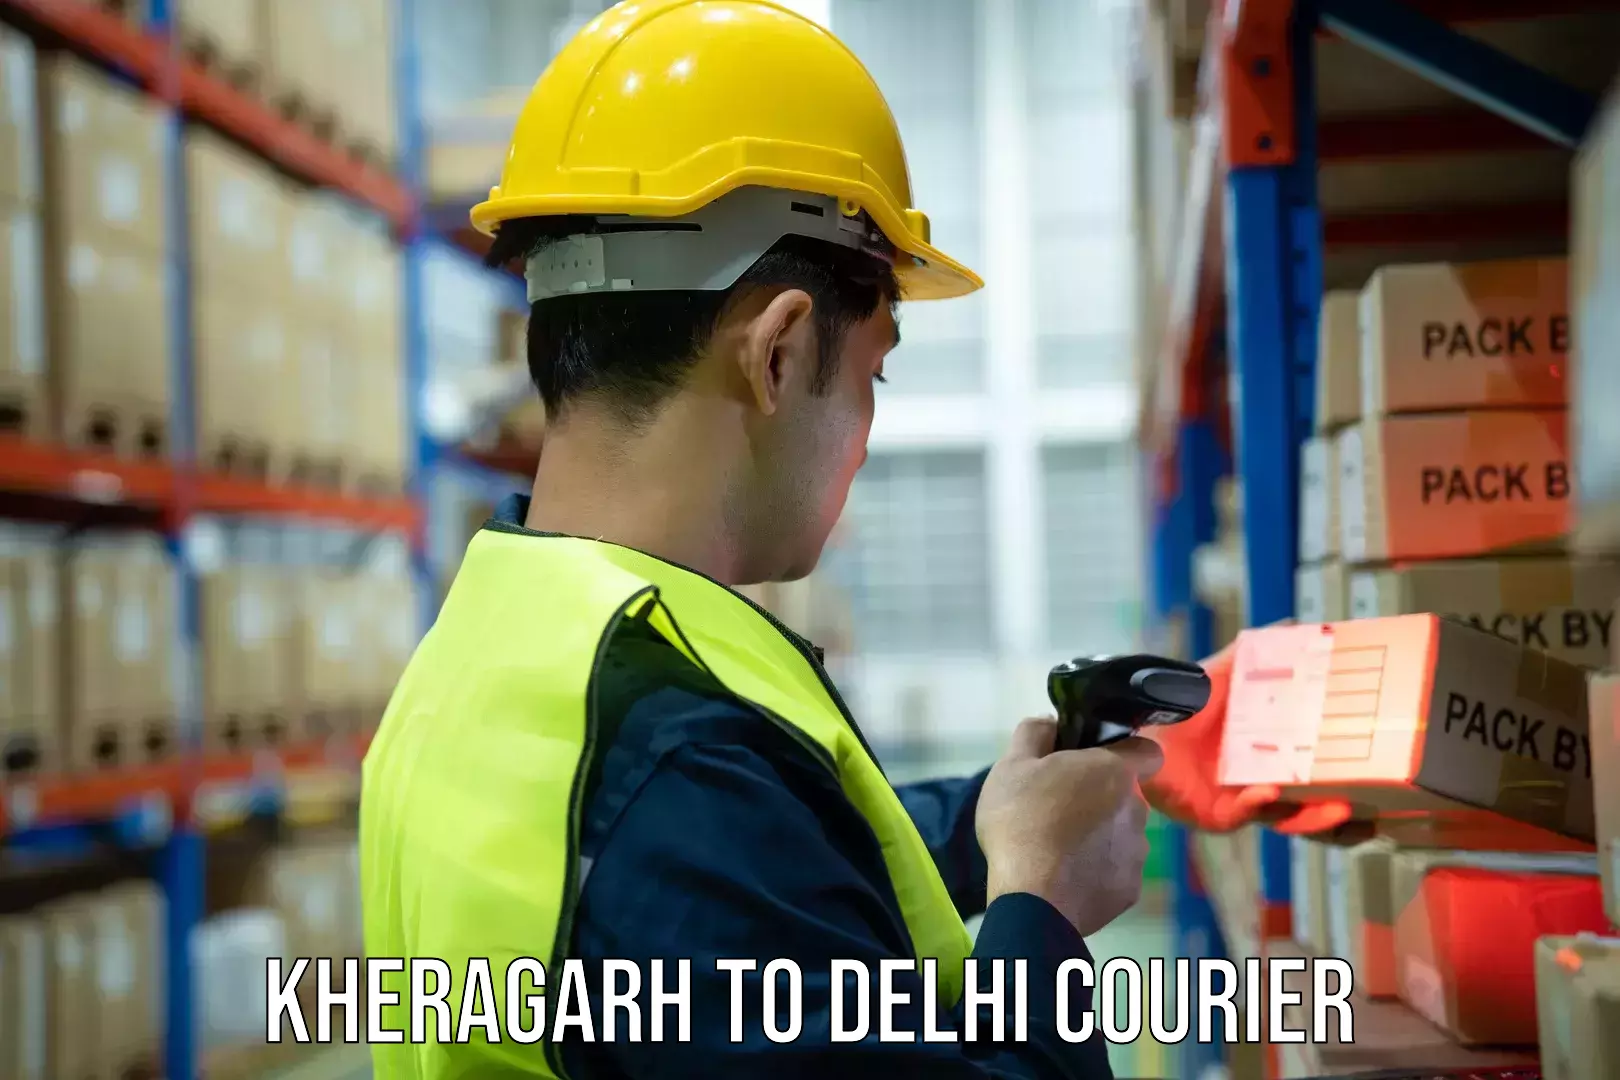 Courier service efficiency Kheragarh to NCR